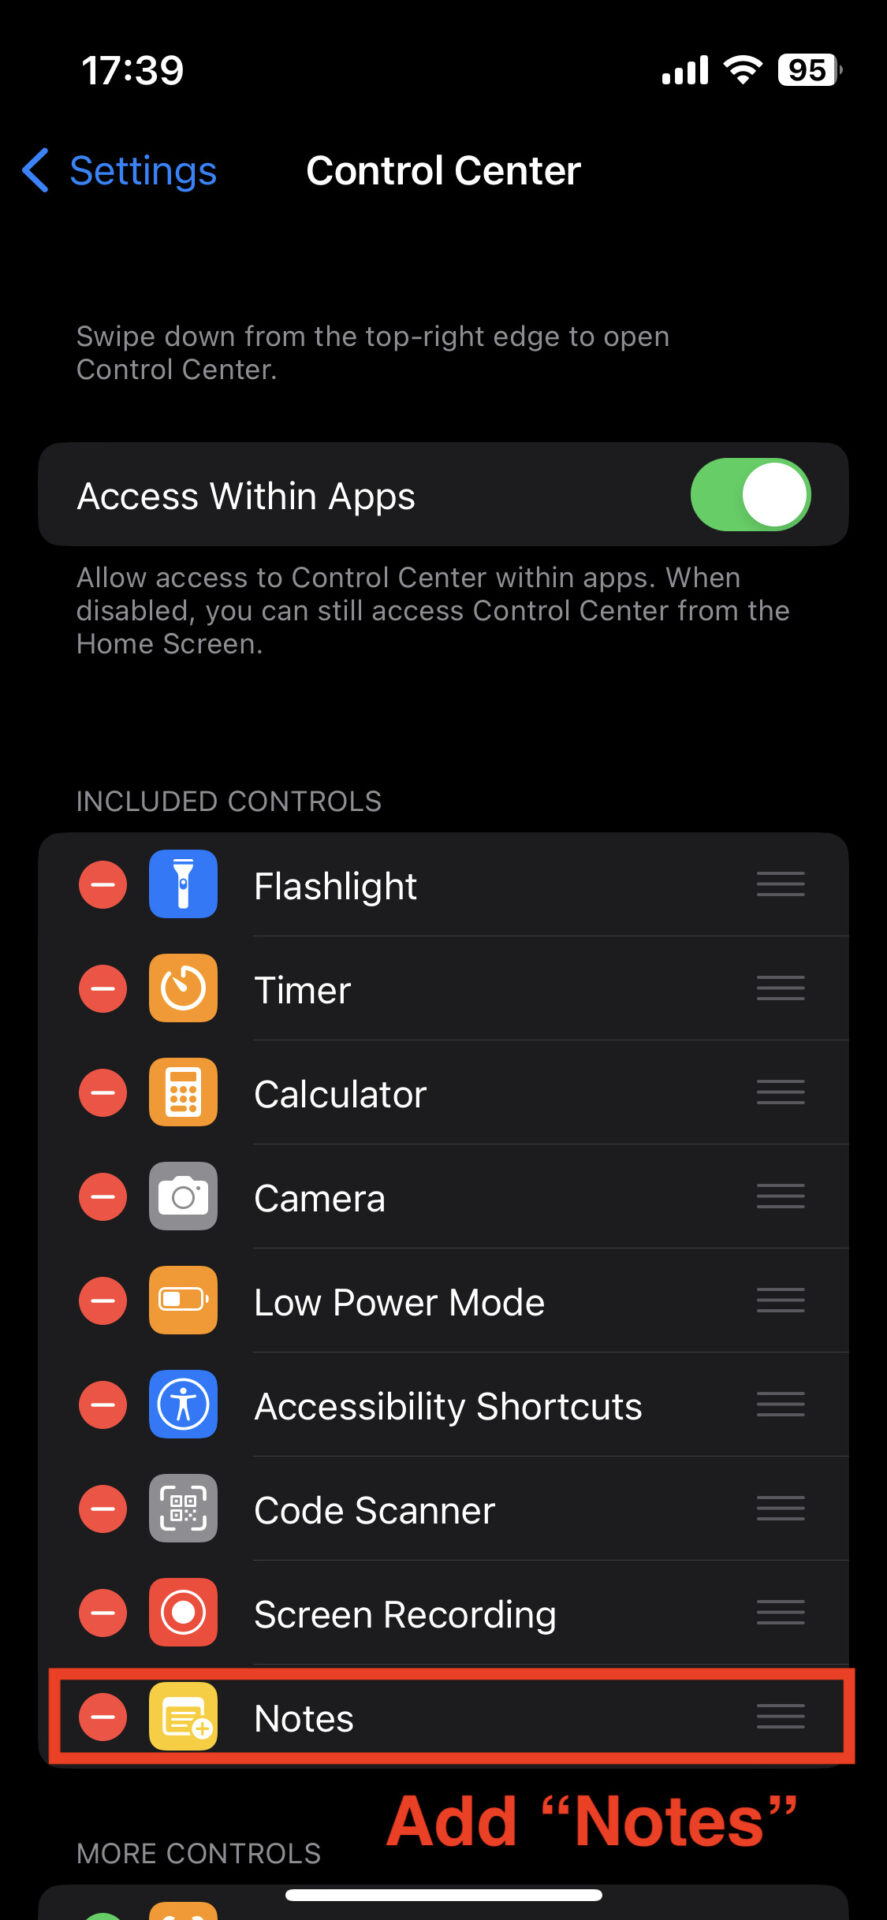 Add Notes to control center